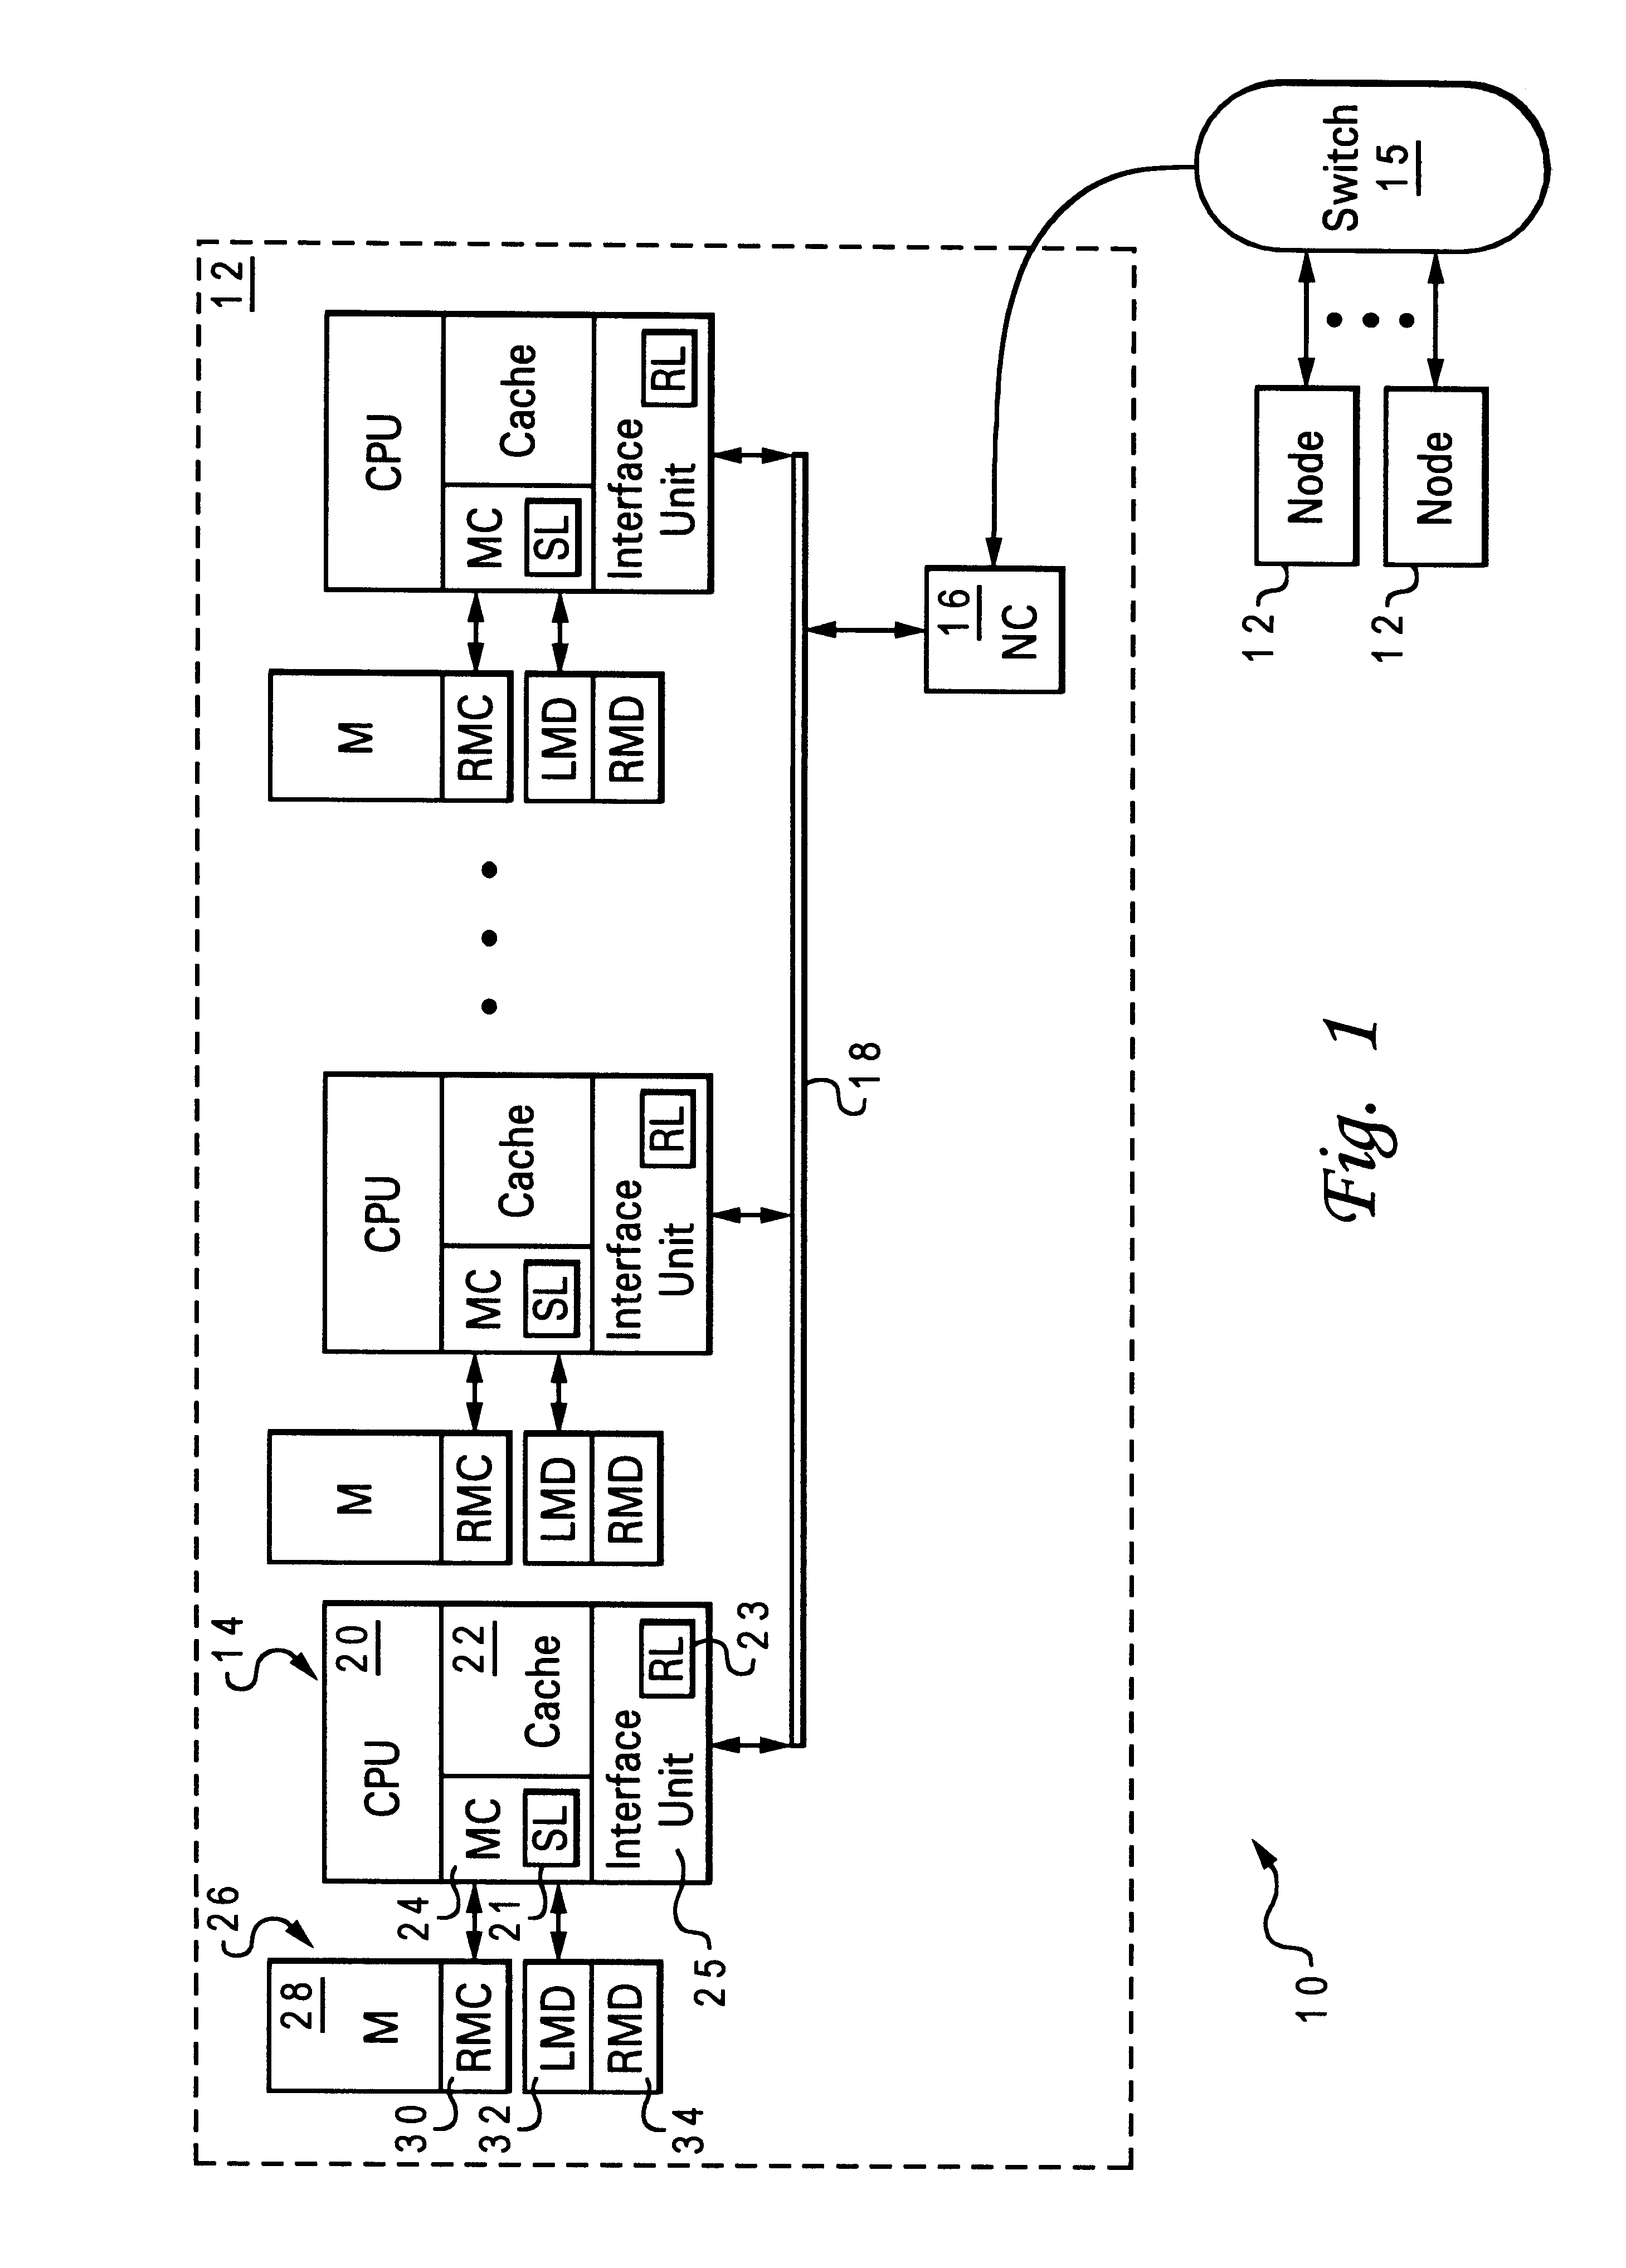 Non-uniform memory access (NUMA) data processing system having a page table including node-specific data storage and coherency control